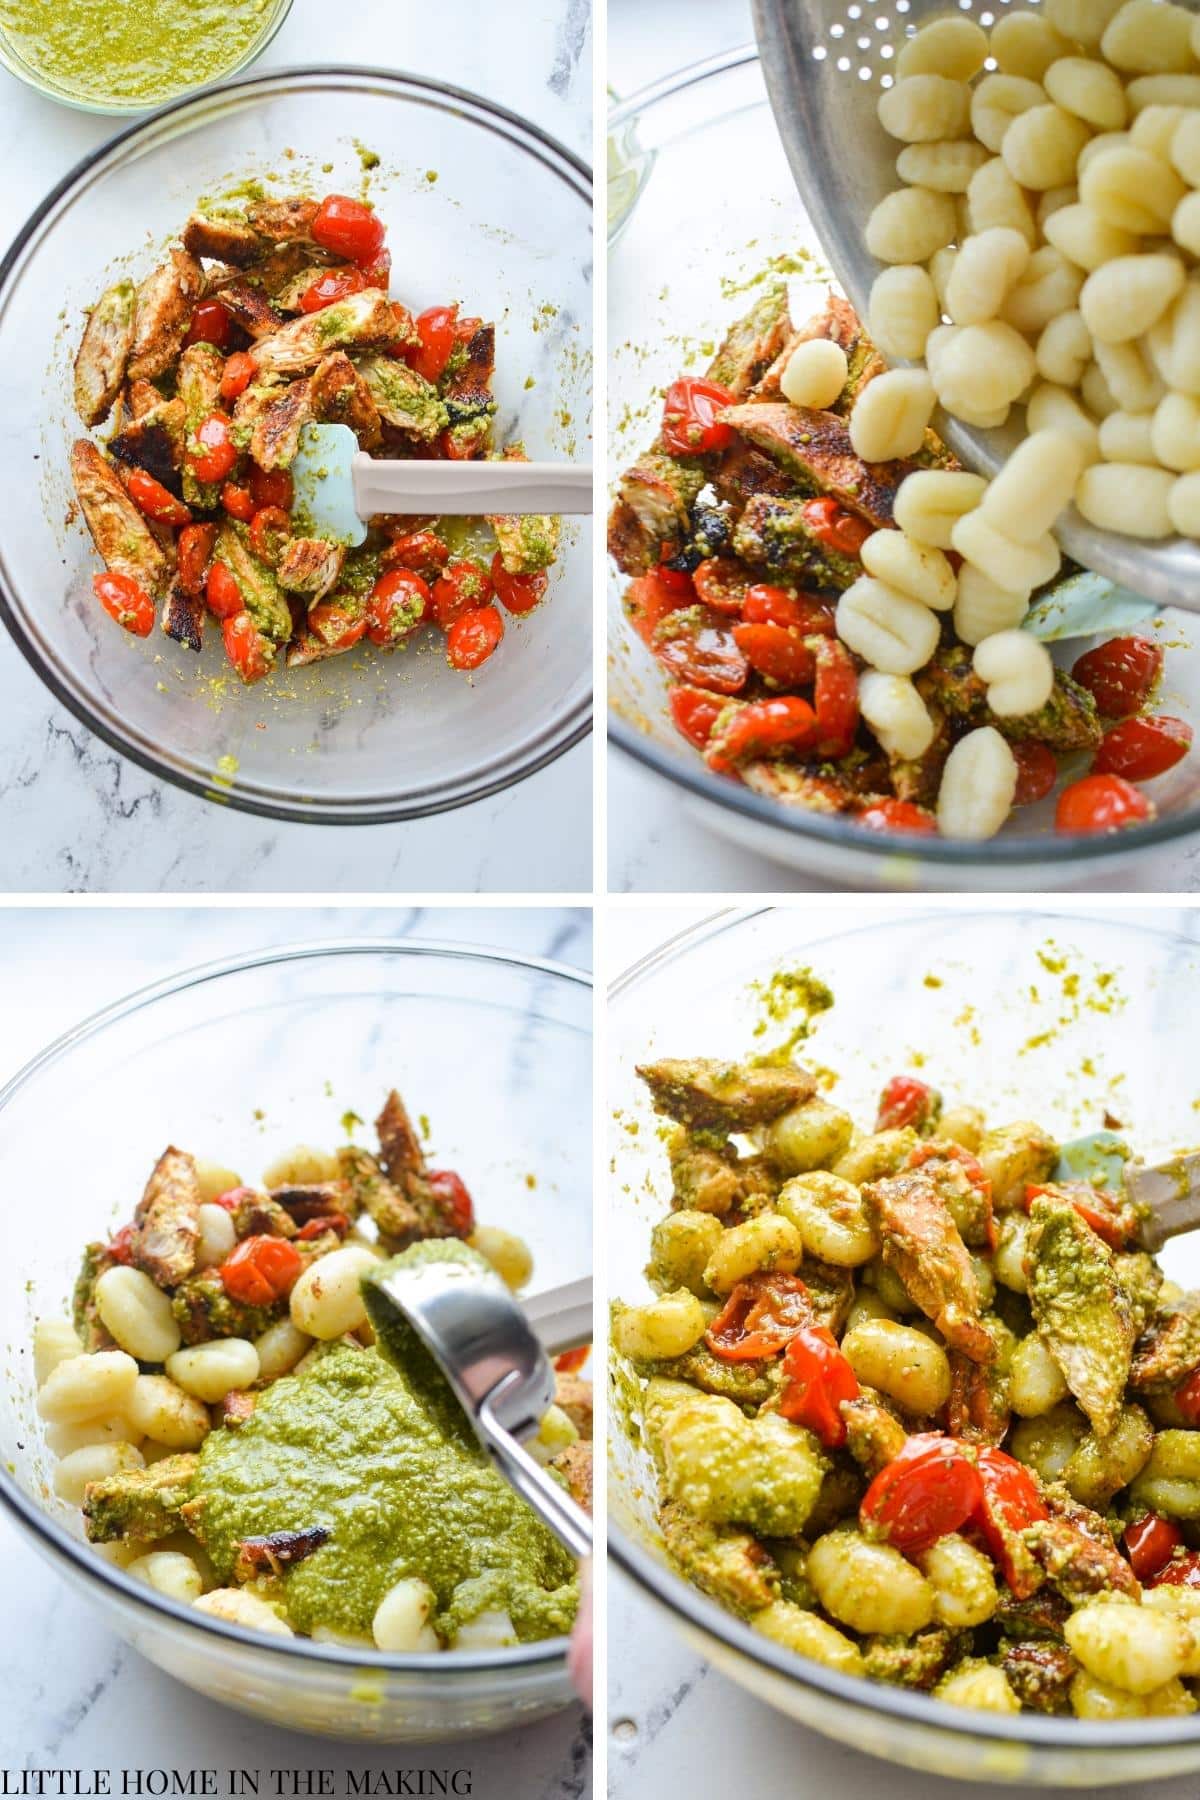 Adding cooked gnocchi and pesto to a bowl with sliced chicken and cherry tomatoes.